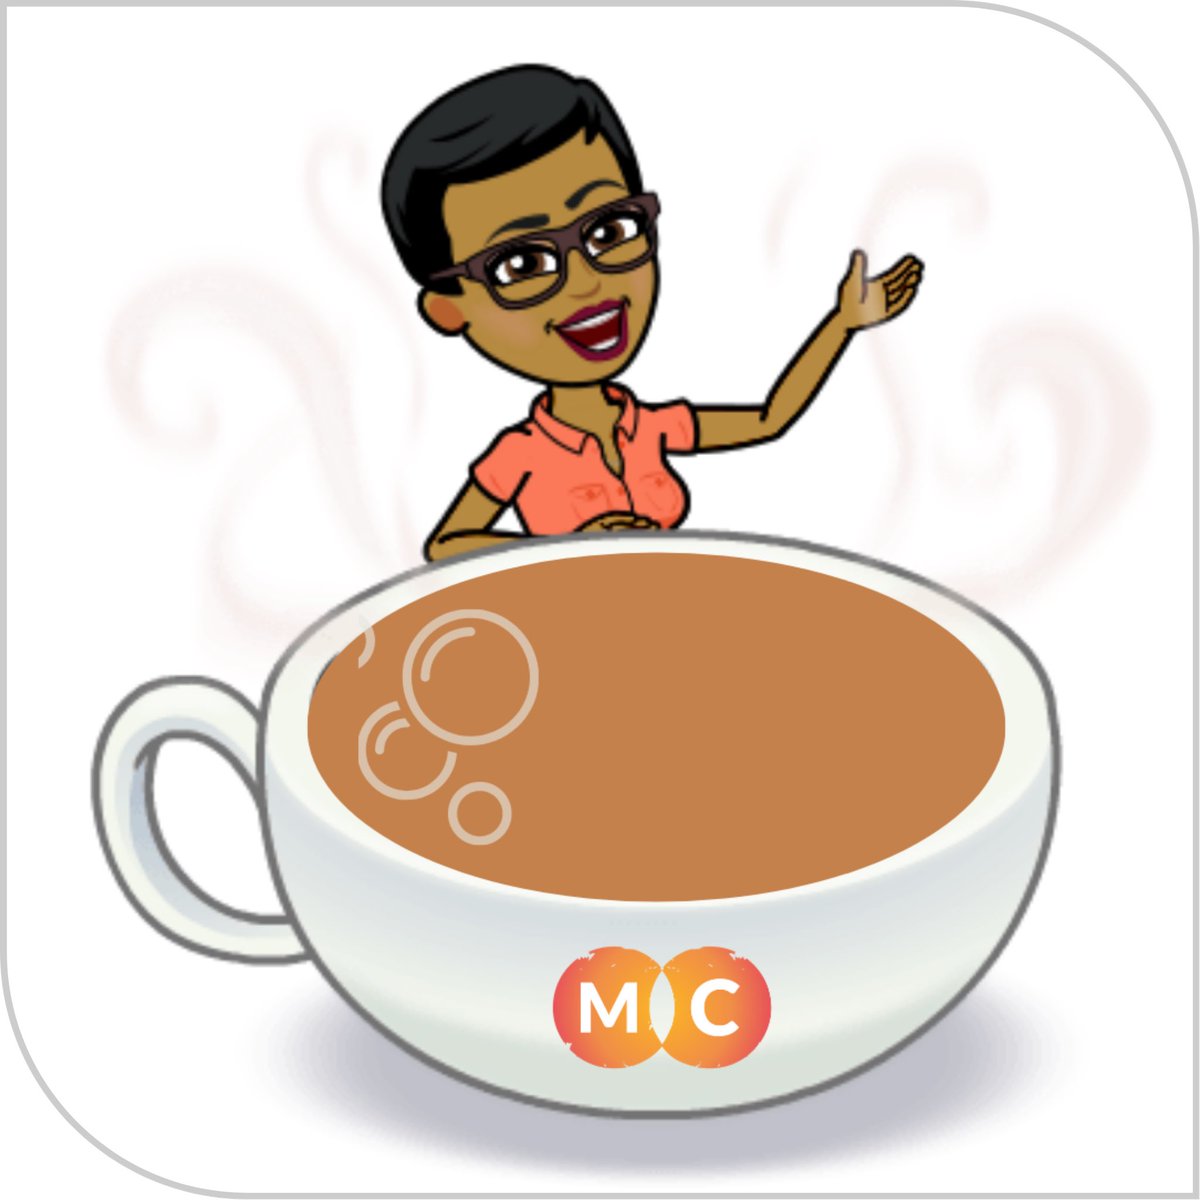 As we New Yawkuhs say, “Wanna tawk?” If so, join me at my next Chai Chat. Ask me anything as we sip our fav cuppas. (Hell, drink what you want. I’m imbibing cawfee right now, so rest assured that I’m no chai fascist. 😳) Tues, May 24, 8 pm ET. Register: bit.ly/3lzi7Ni